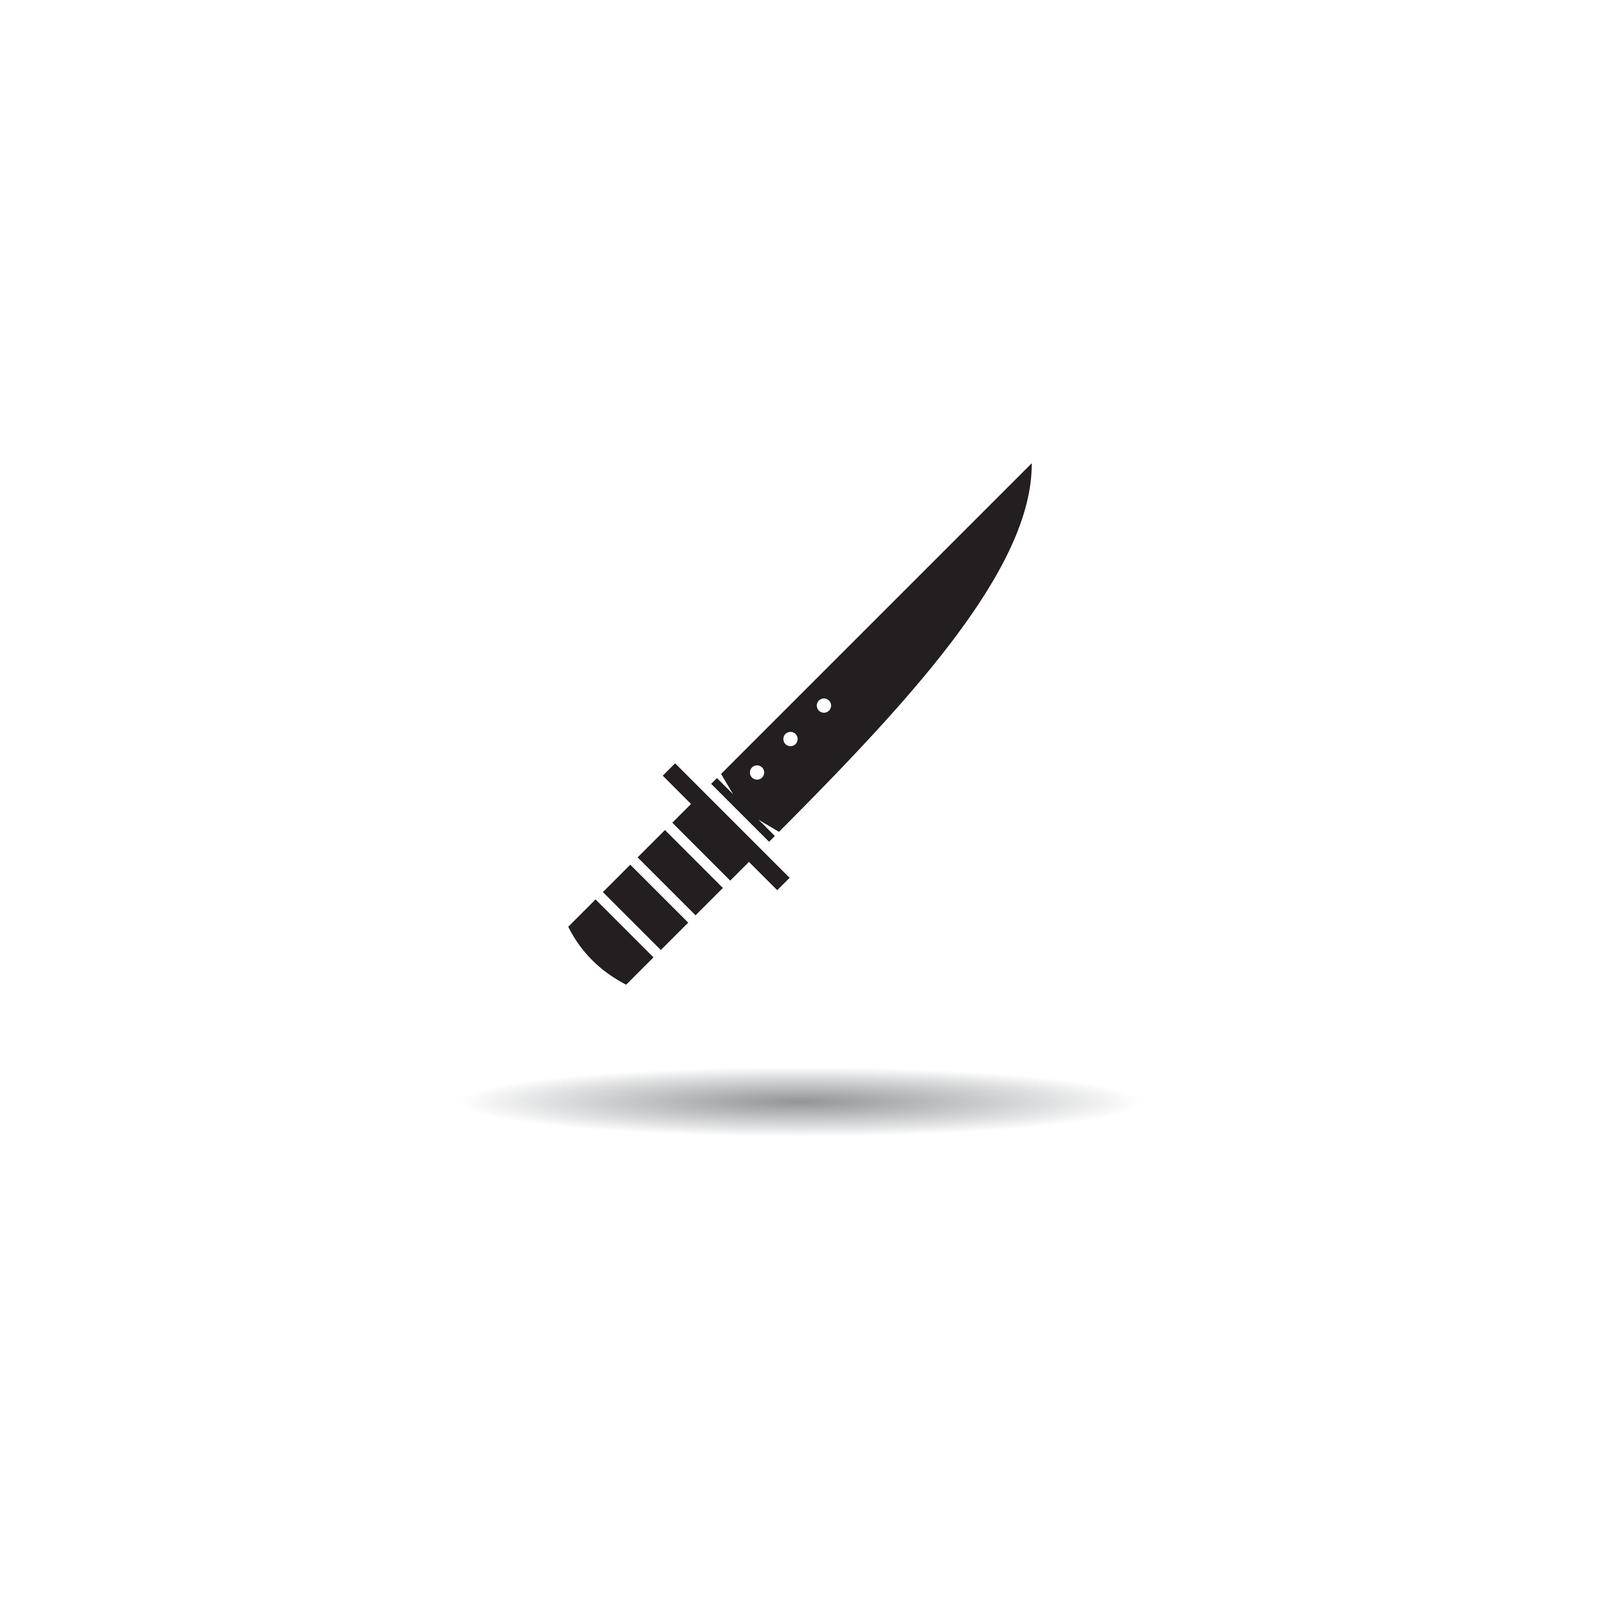 Military Knife icon by rnking